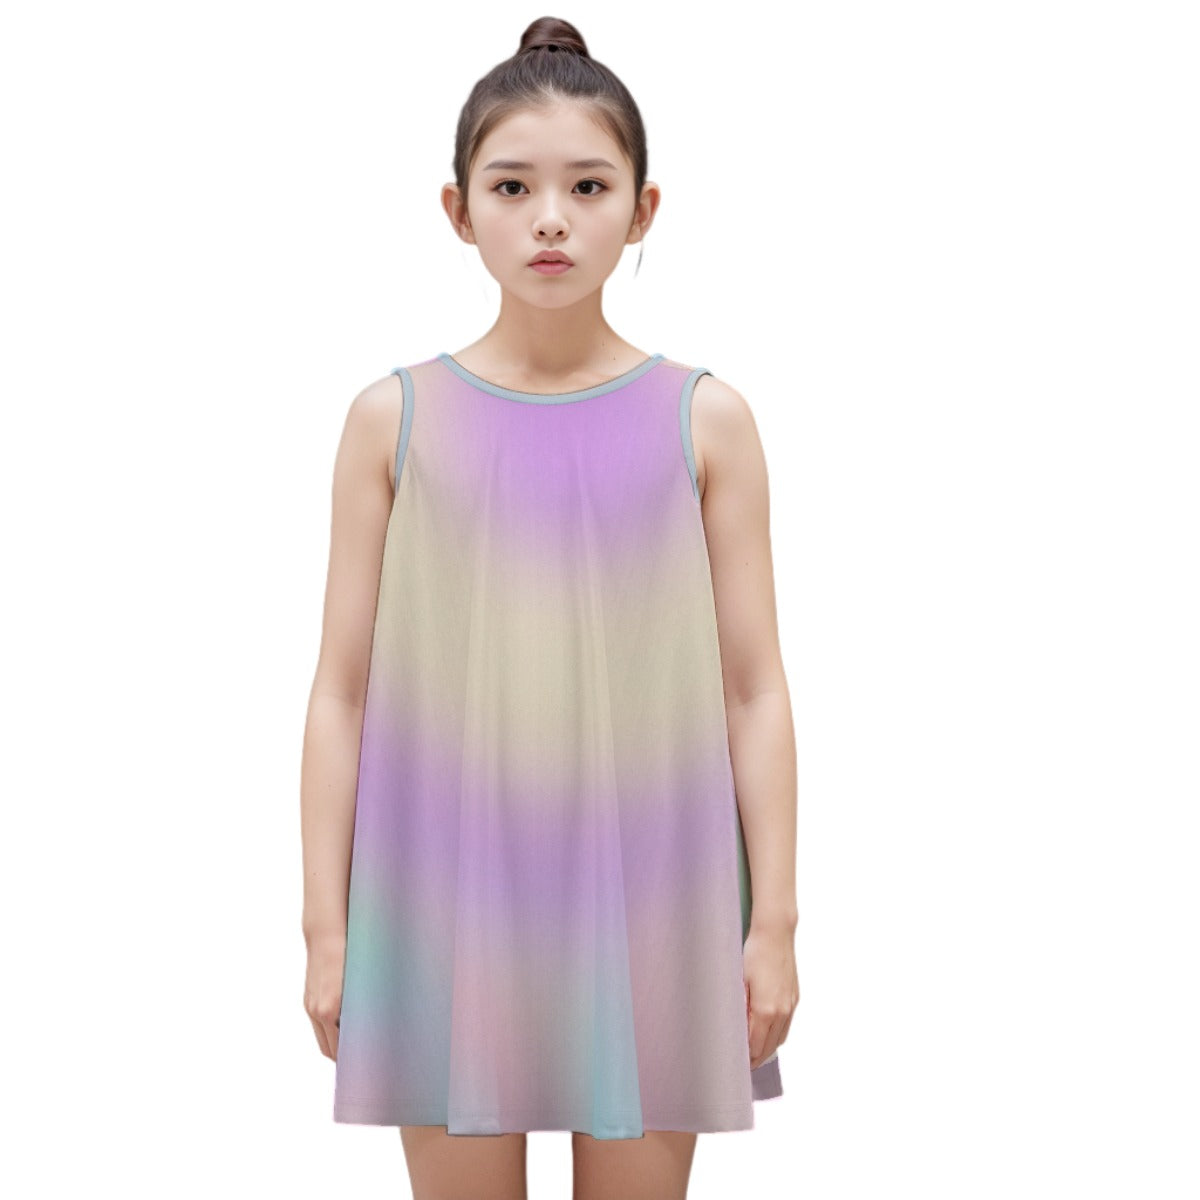 multi-colored - Cotton Candy Prism Kid's Sleeveless Dress | 100% Cotton - girls dress at TFC&H Co.